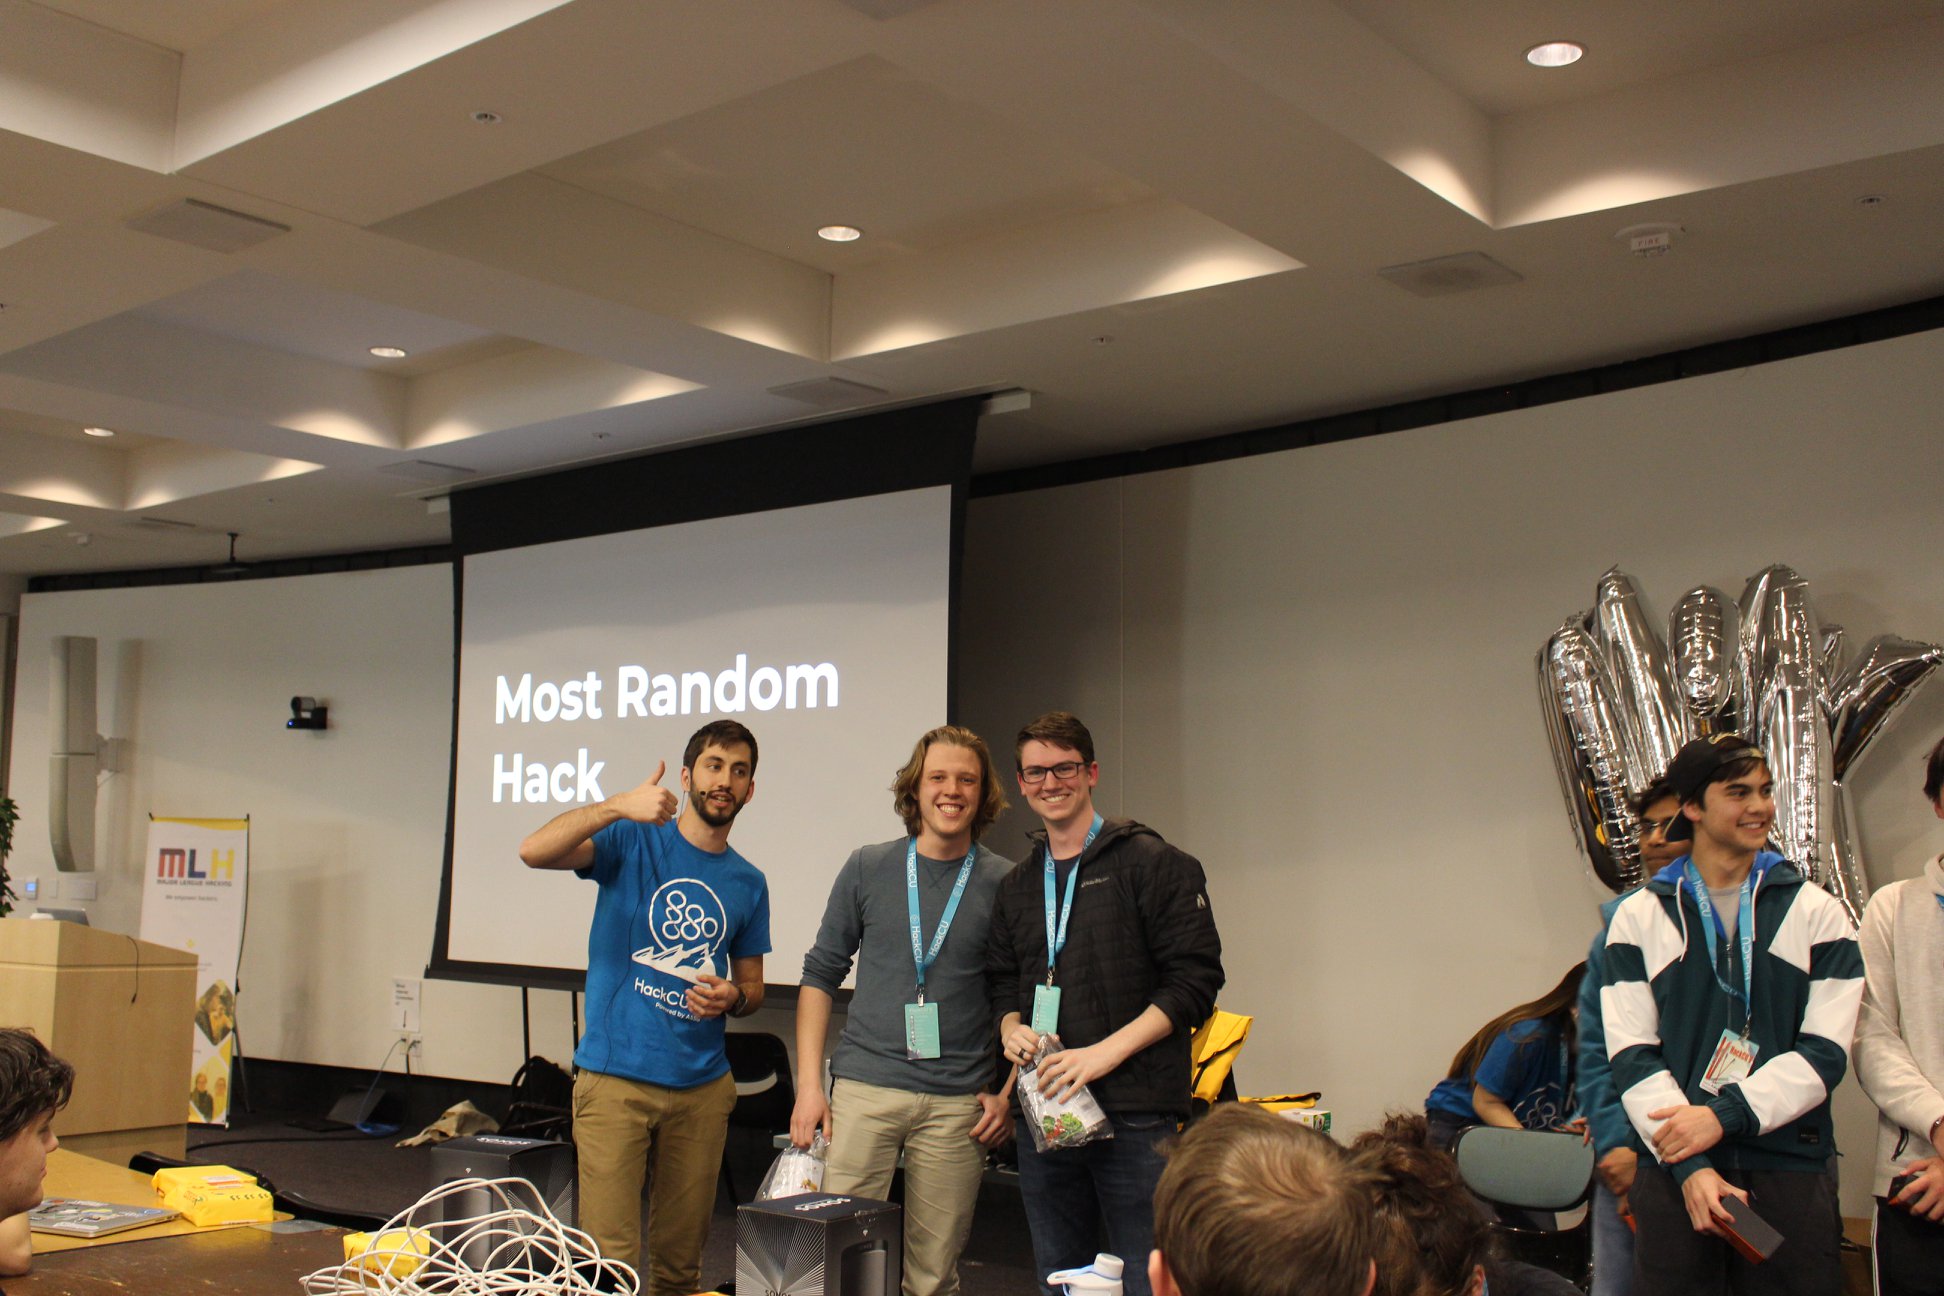 Jake and Fisher winning the Best Random Hack Prize